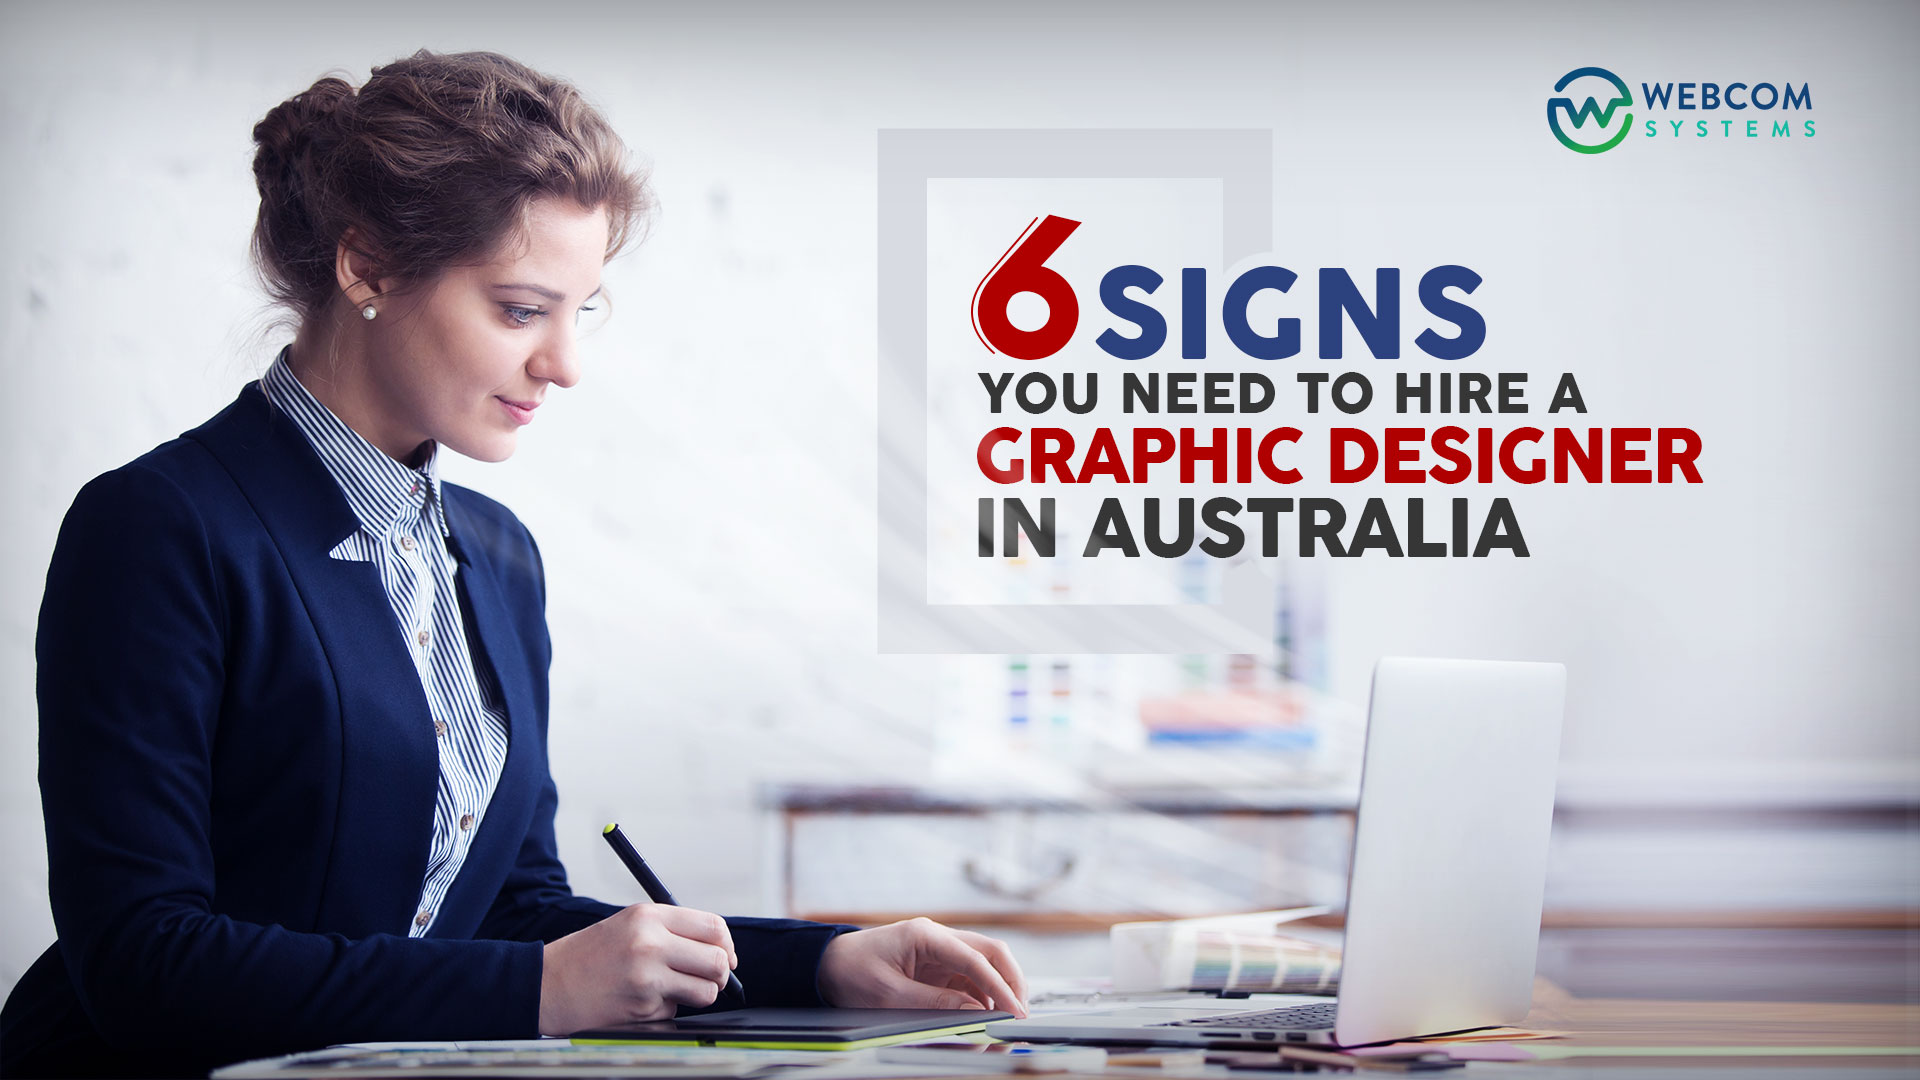 6 Signs You Need to Hire a Graphic Designer in Australia